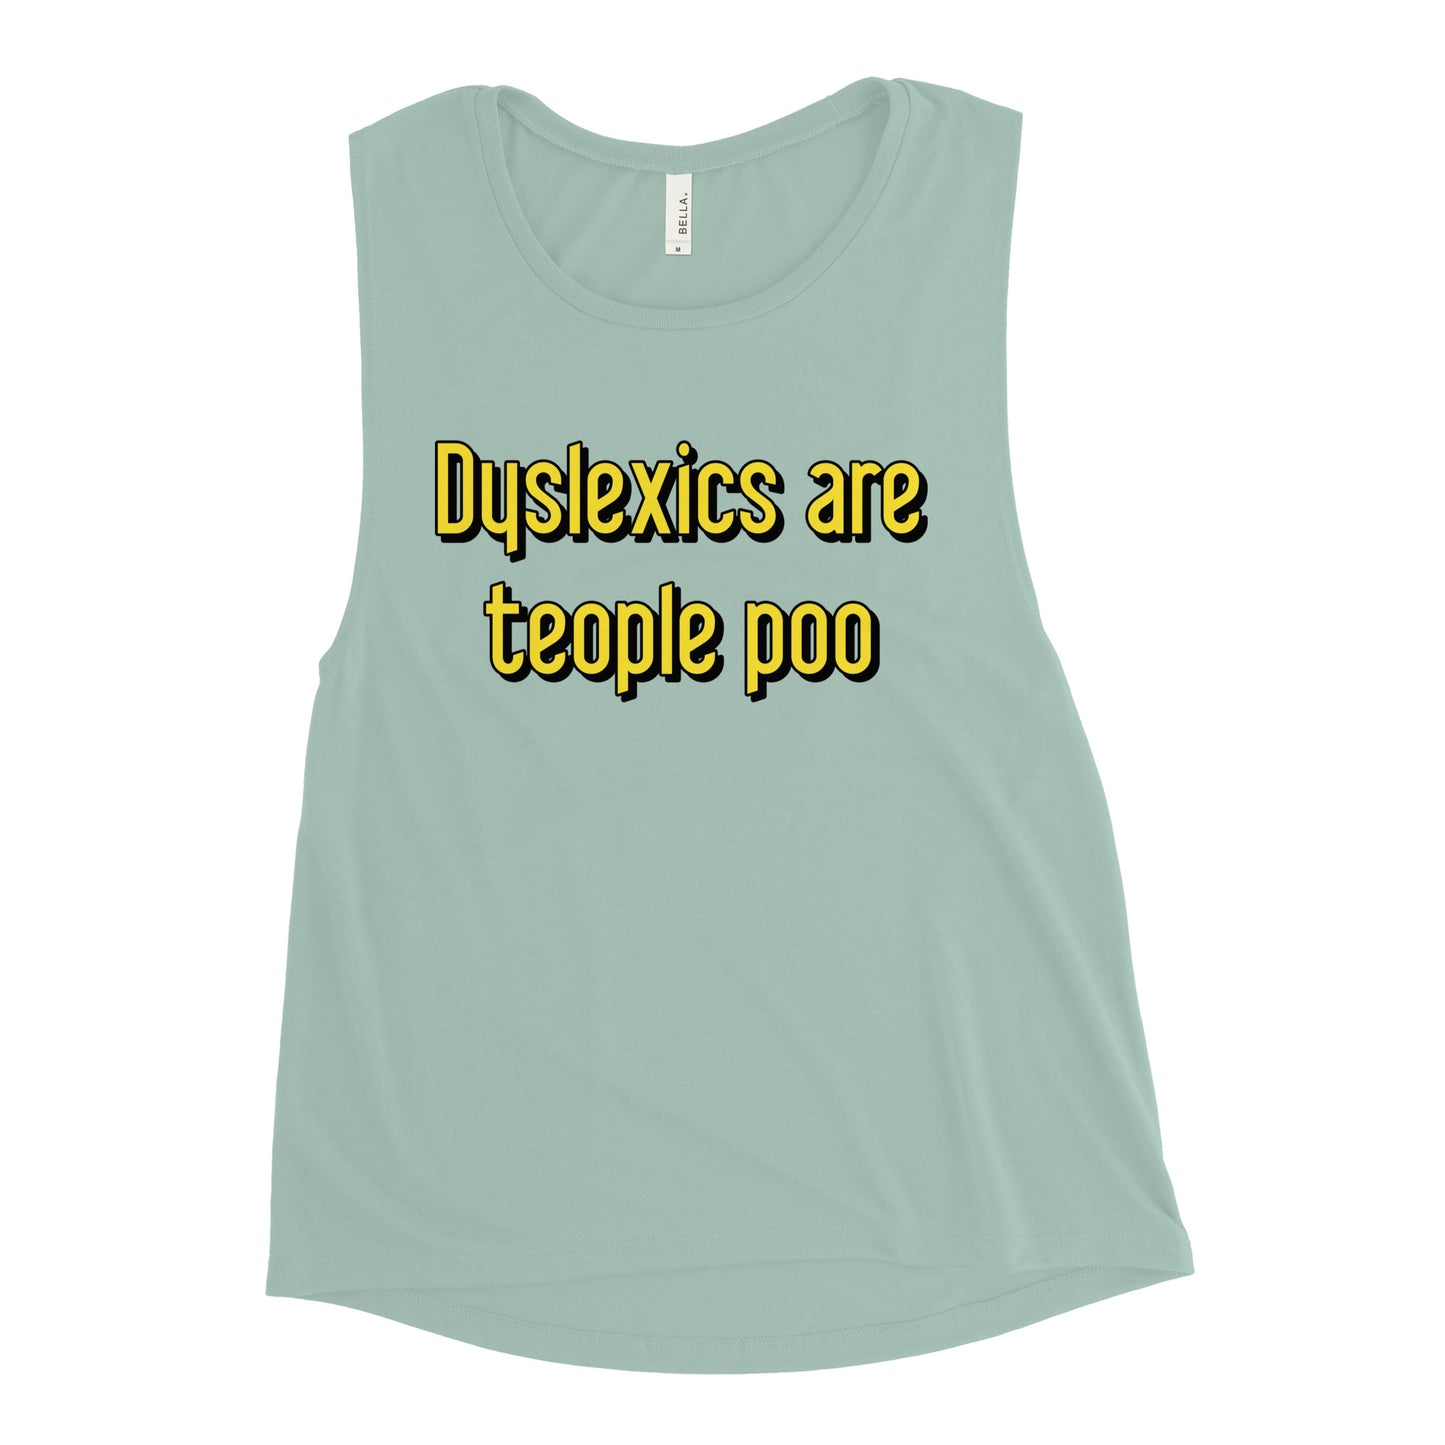 Dyslexics are teople poo Women's Muscle Tank